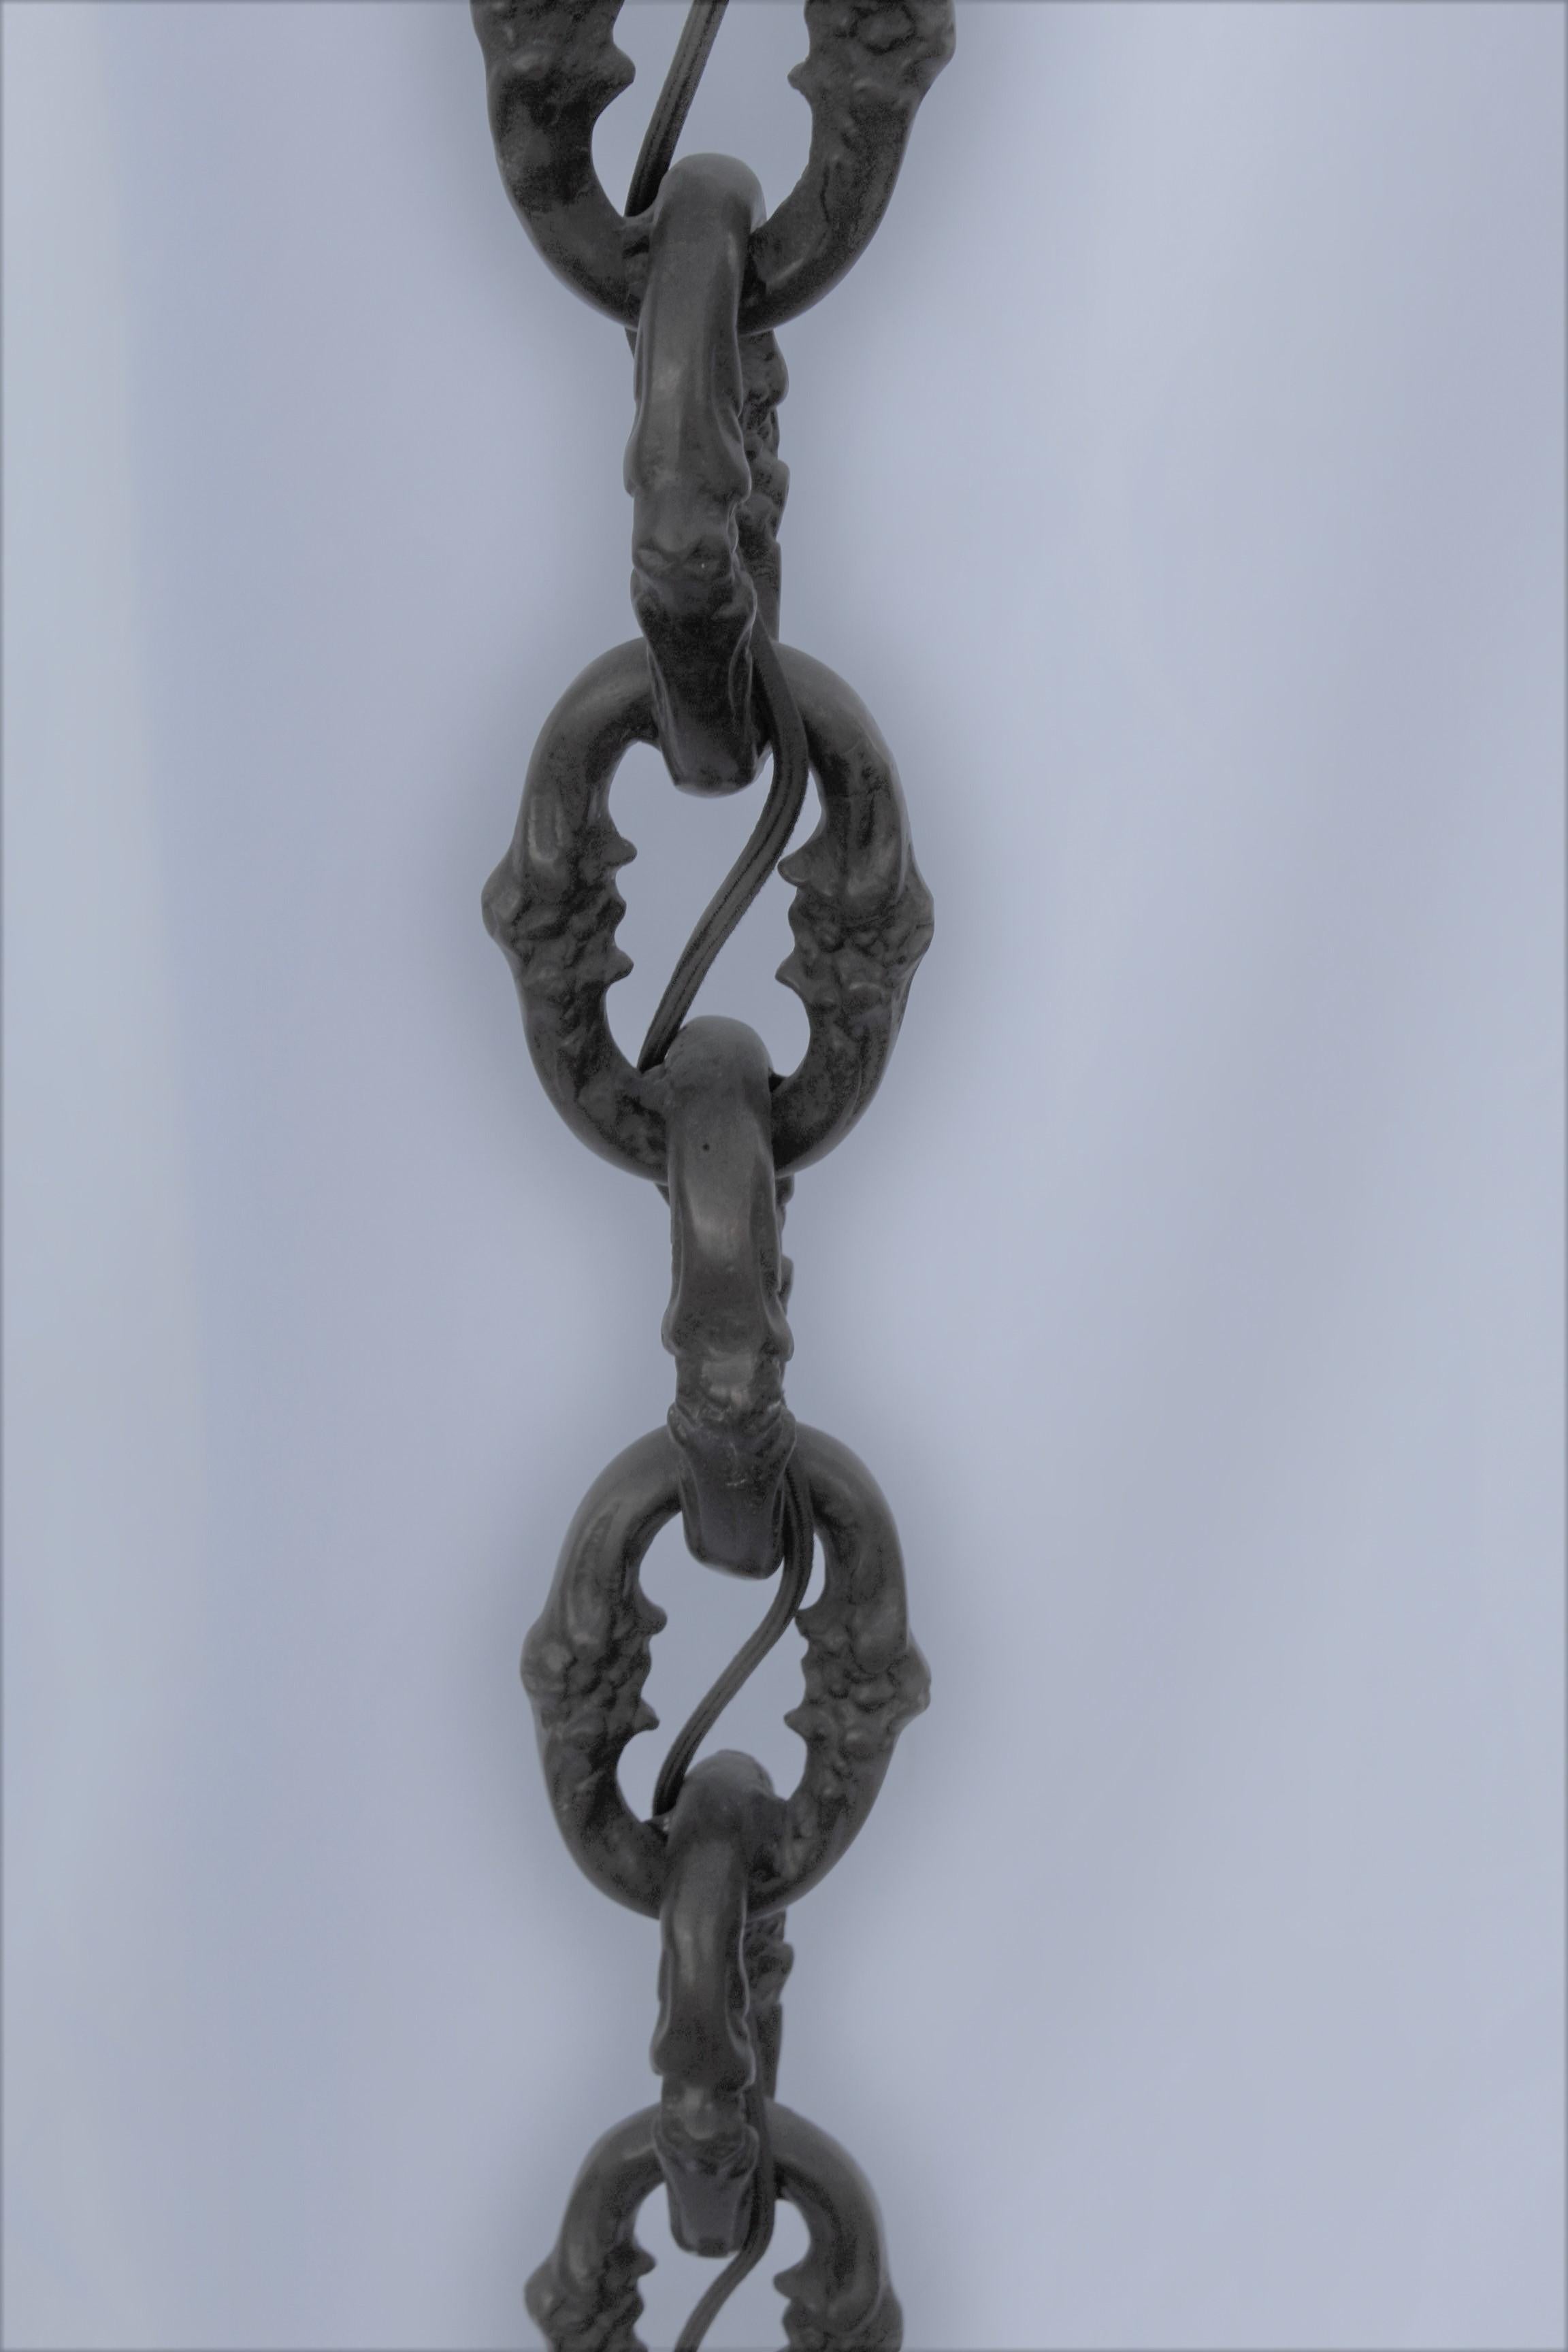 Great looking welded chain links into a standing floor lamp. Solid absolute black marble base. Has a single brass socket and harp. No shade. Deco/modern designed for local lighting showroom.